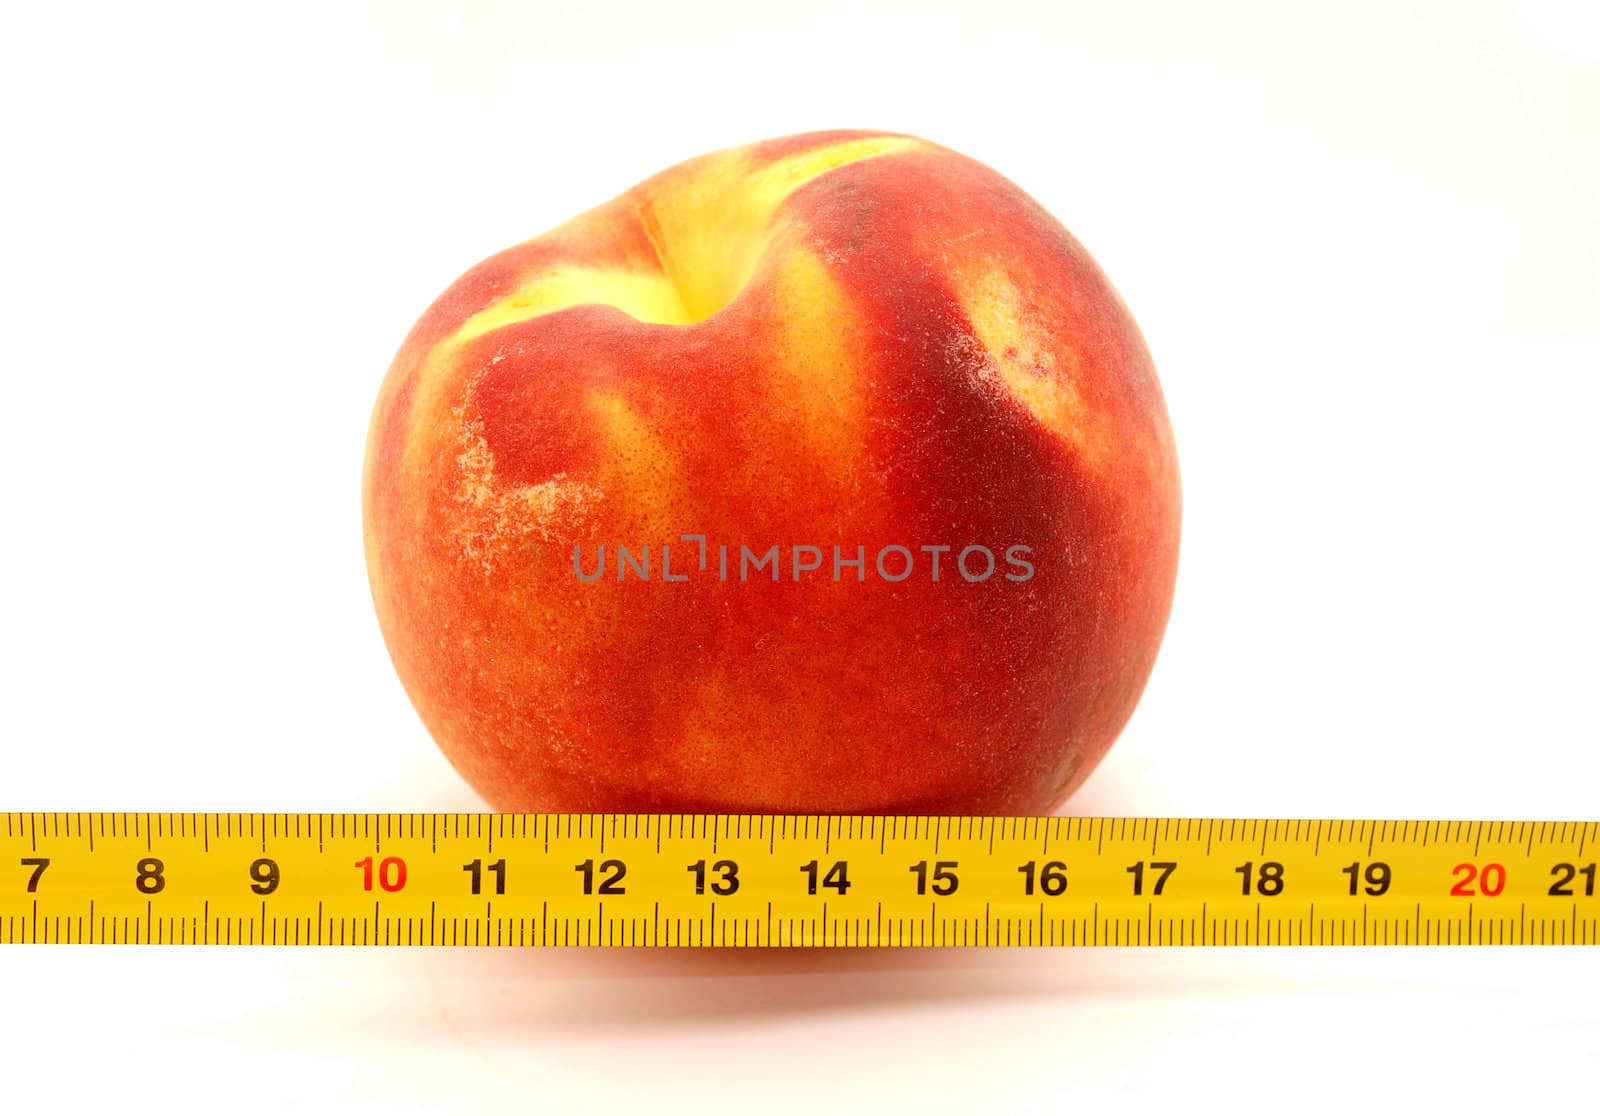 Peach and ruler on a white background    